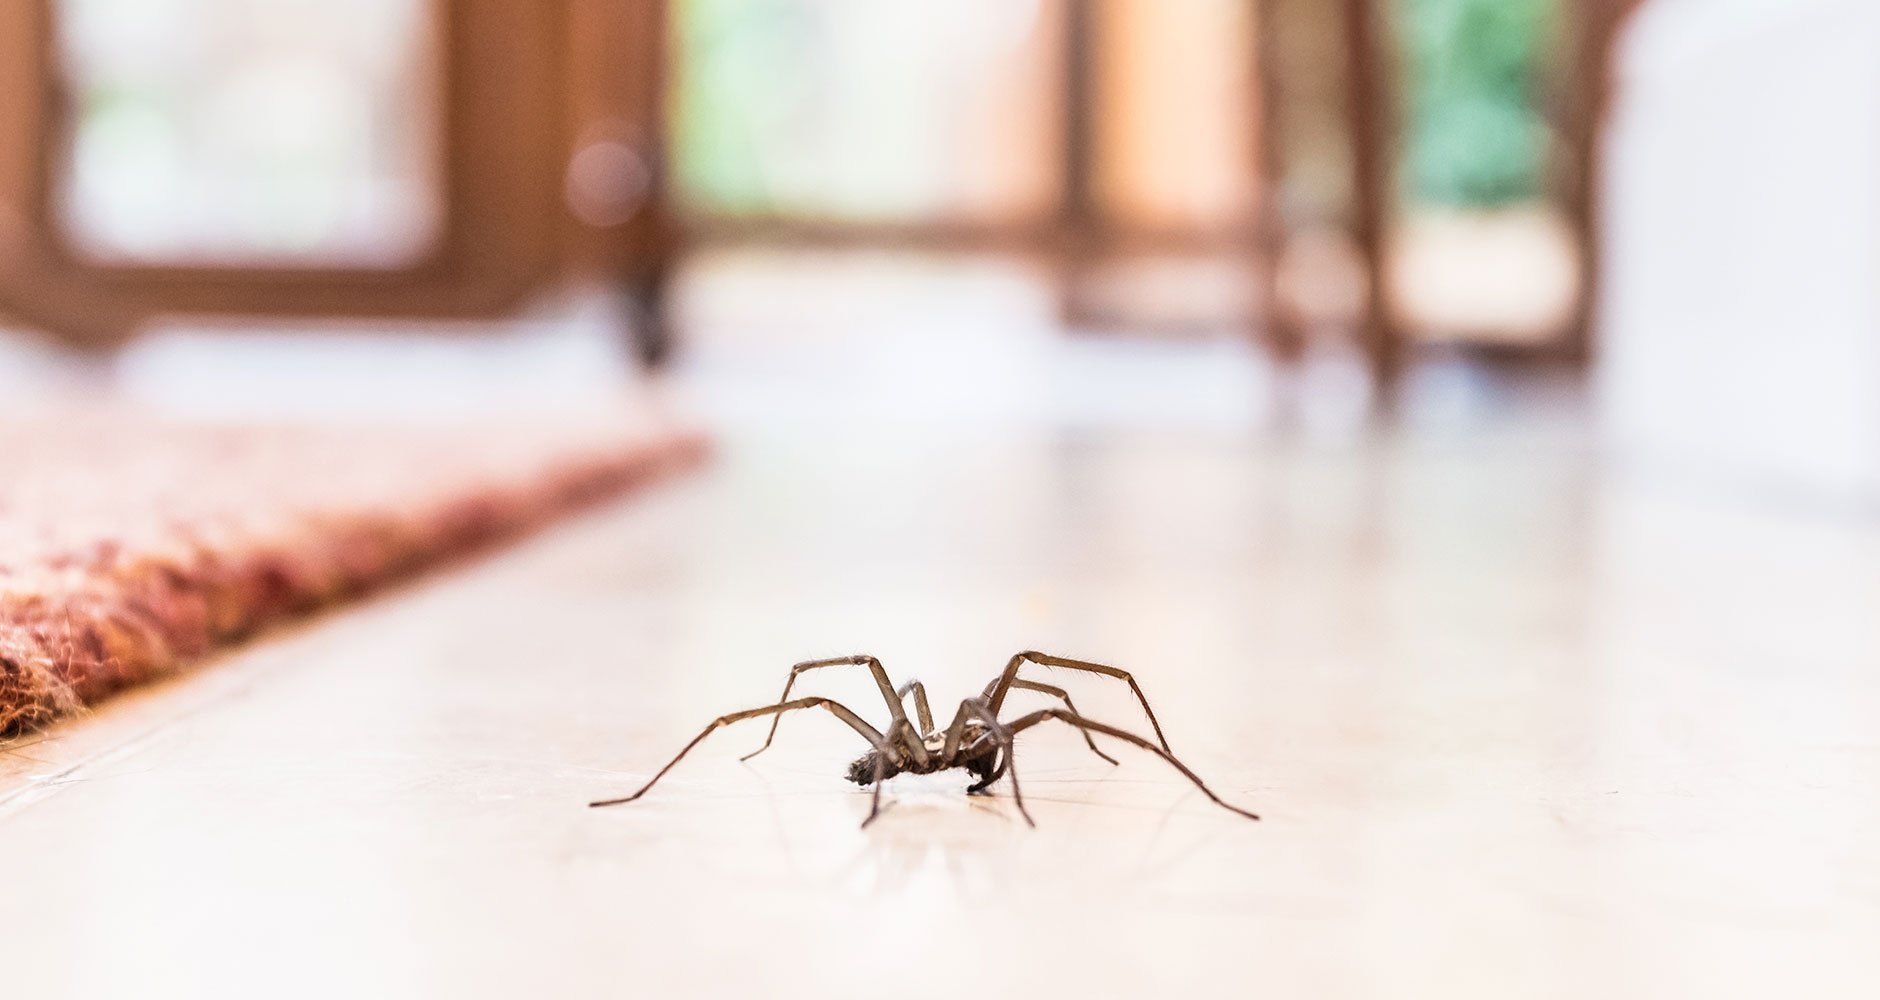 How to Get Rid of Spiders from Your Residence?